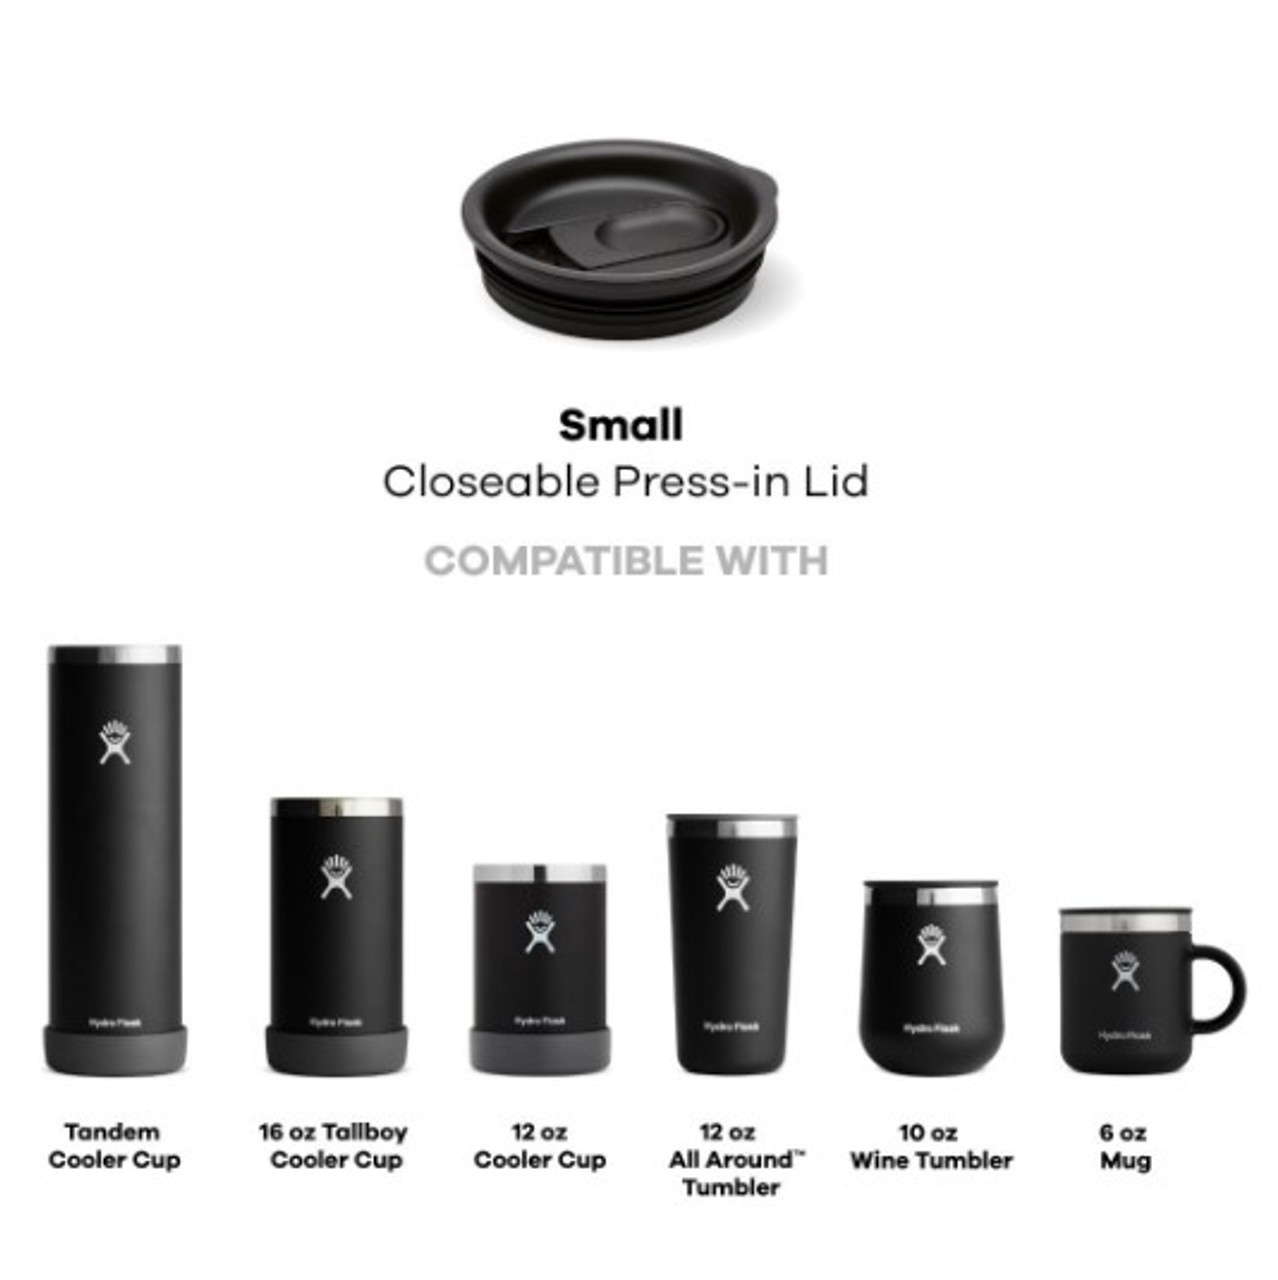 https://cdn11.bigcommerce.com/s-s7ib93jl4n/images/stencil/1280x1280/products/49651/65517/Hydro-flask-Small-Closable-Press-In-Lid-3__26731.1658501866.jpg?c=2?imbypass=on